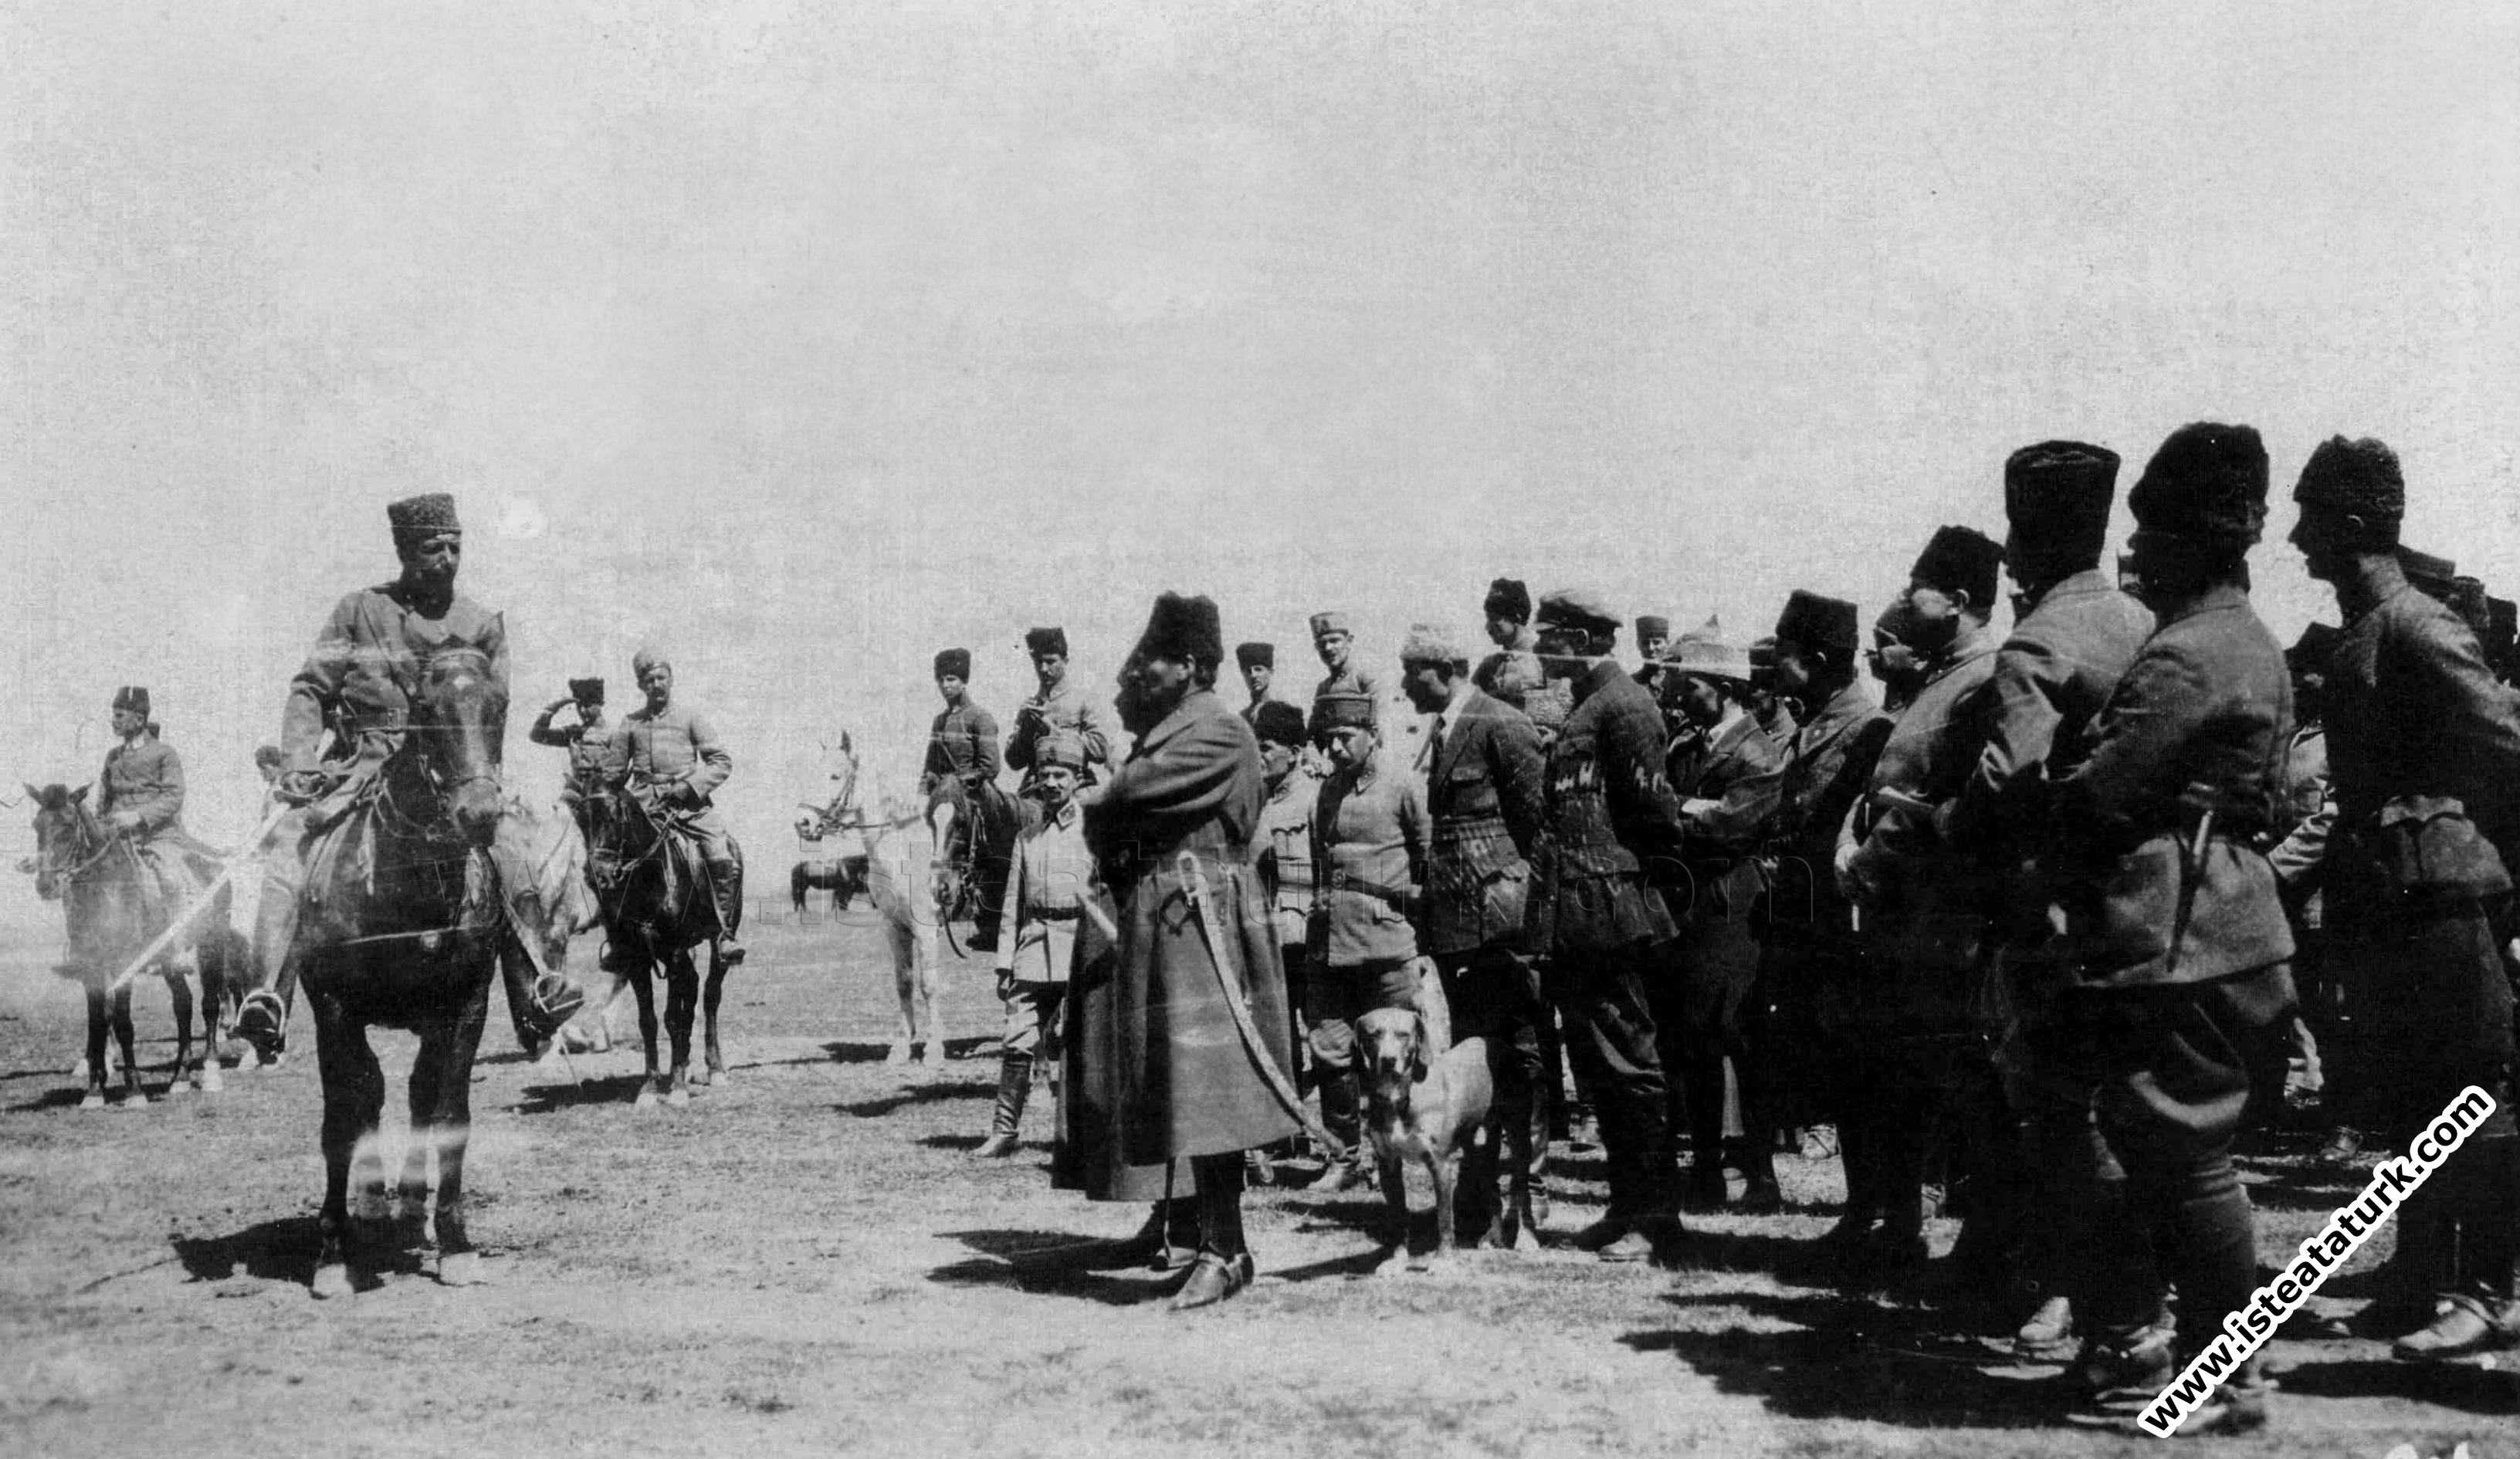 Commander-in-Chief Gazi Mustafa Kemal Pasha supervises the preparations of the army before the Great Offensive at Ilgın Maneuvers. (01.04.1922)